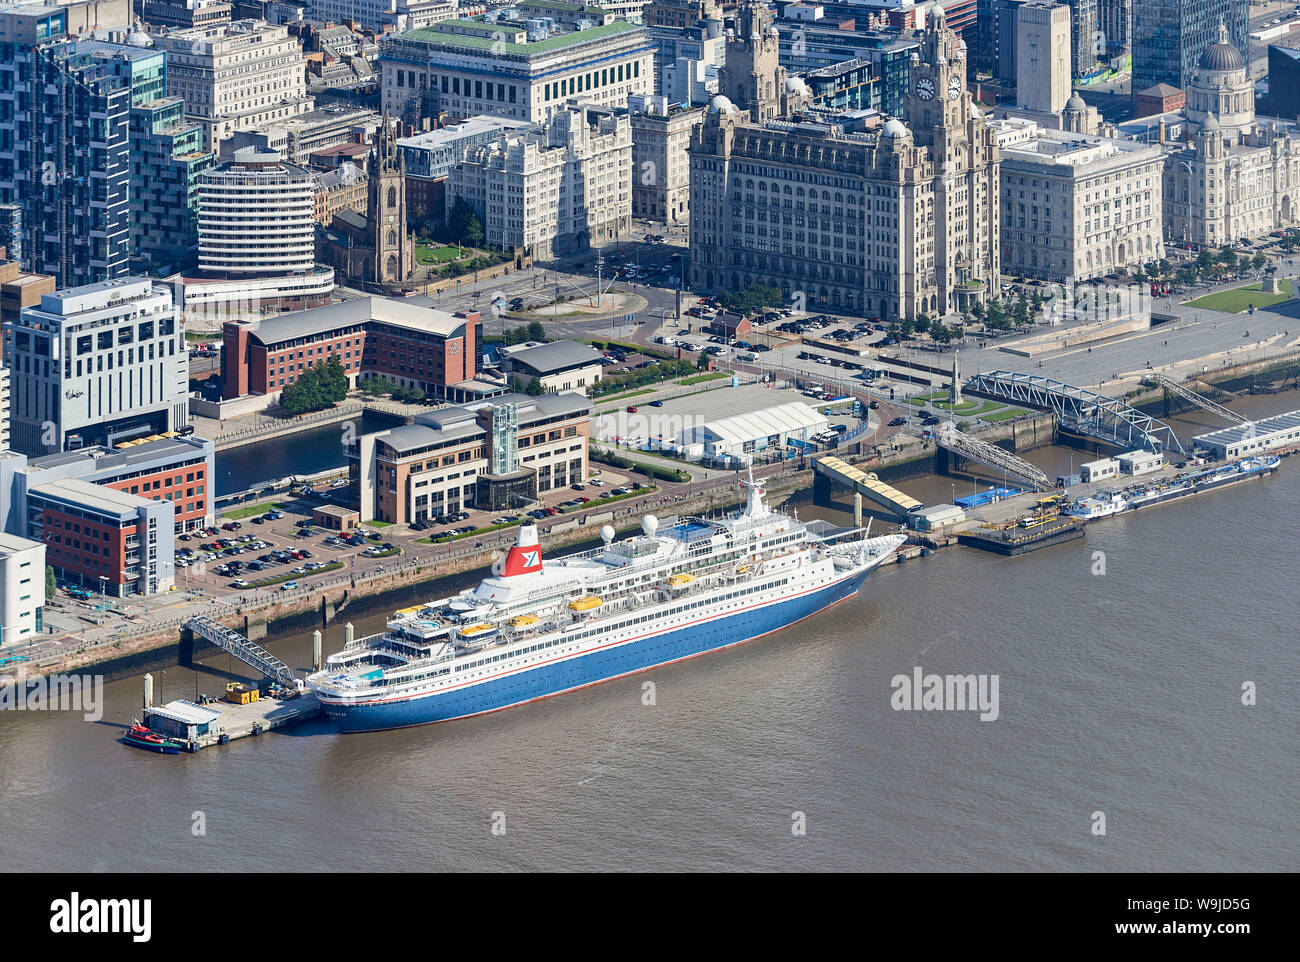 A Fred Olsen line Cruise ship, Black Watch and the Dazzle Mersey Ferry shot from the air, Liverpool, waterfront, North West England, UK Stock Photo